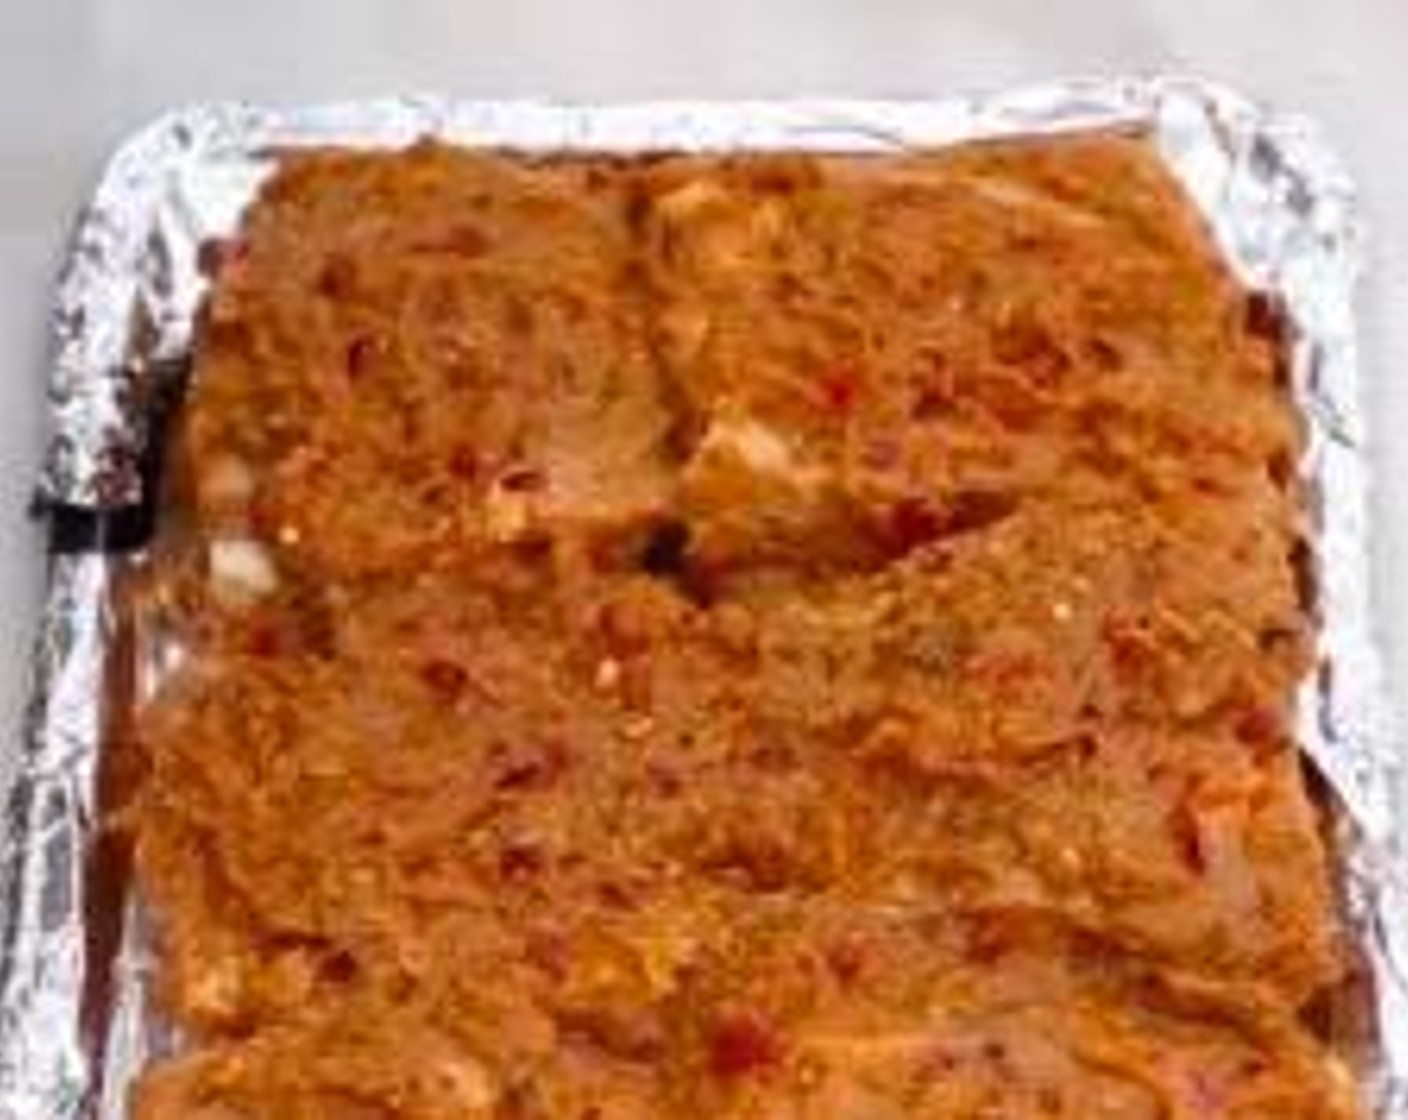 step 5 In a baking tray covered with aluminum foil, arrange the spare ribs meat side up. Sprinkle Crushed Red Pepper Flakes (1/4 tsp) on top.